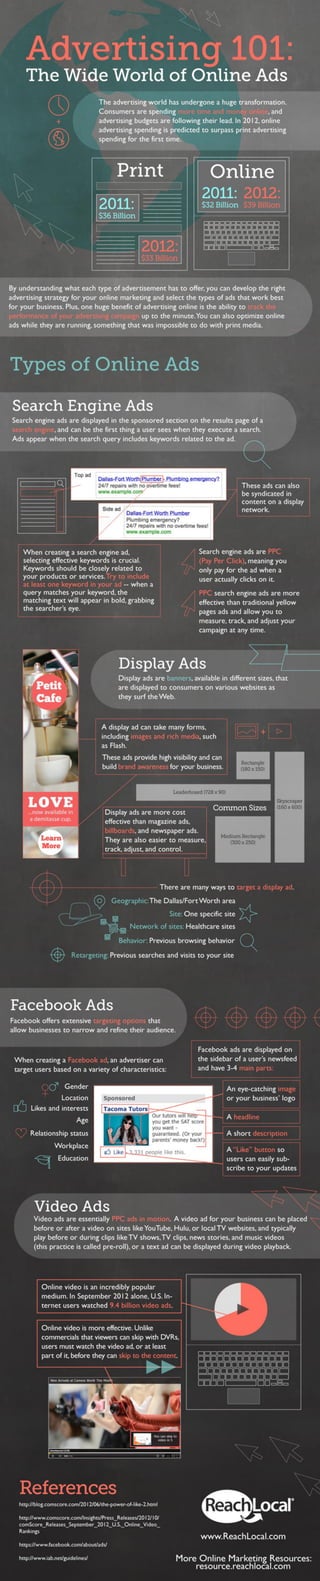 Online Advertising 101 Infographic